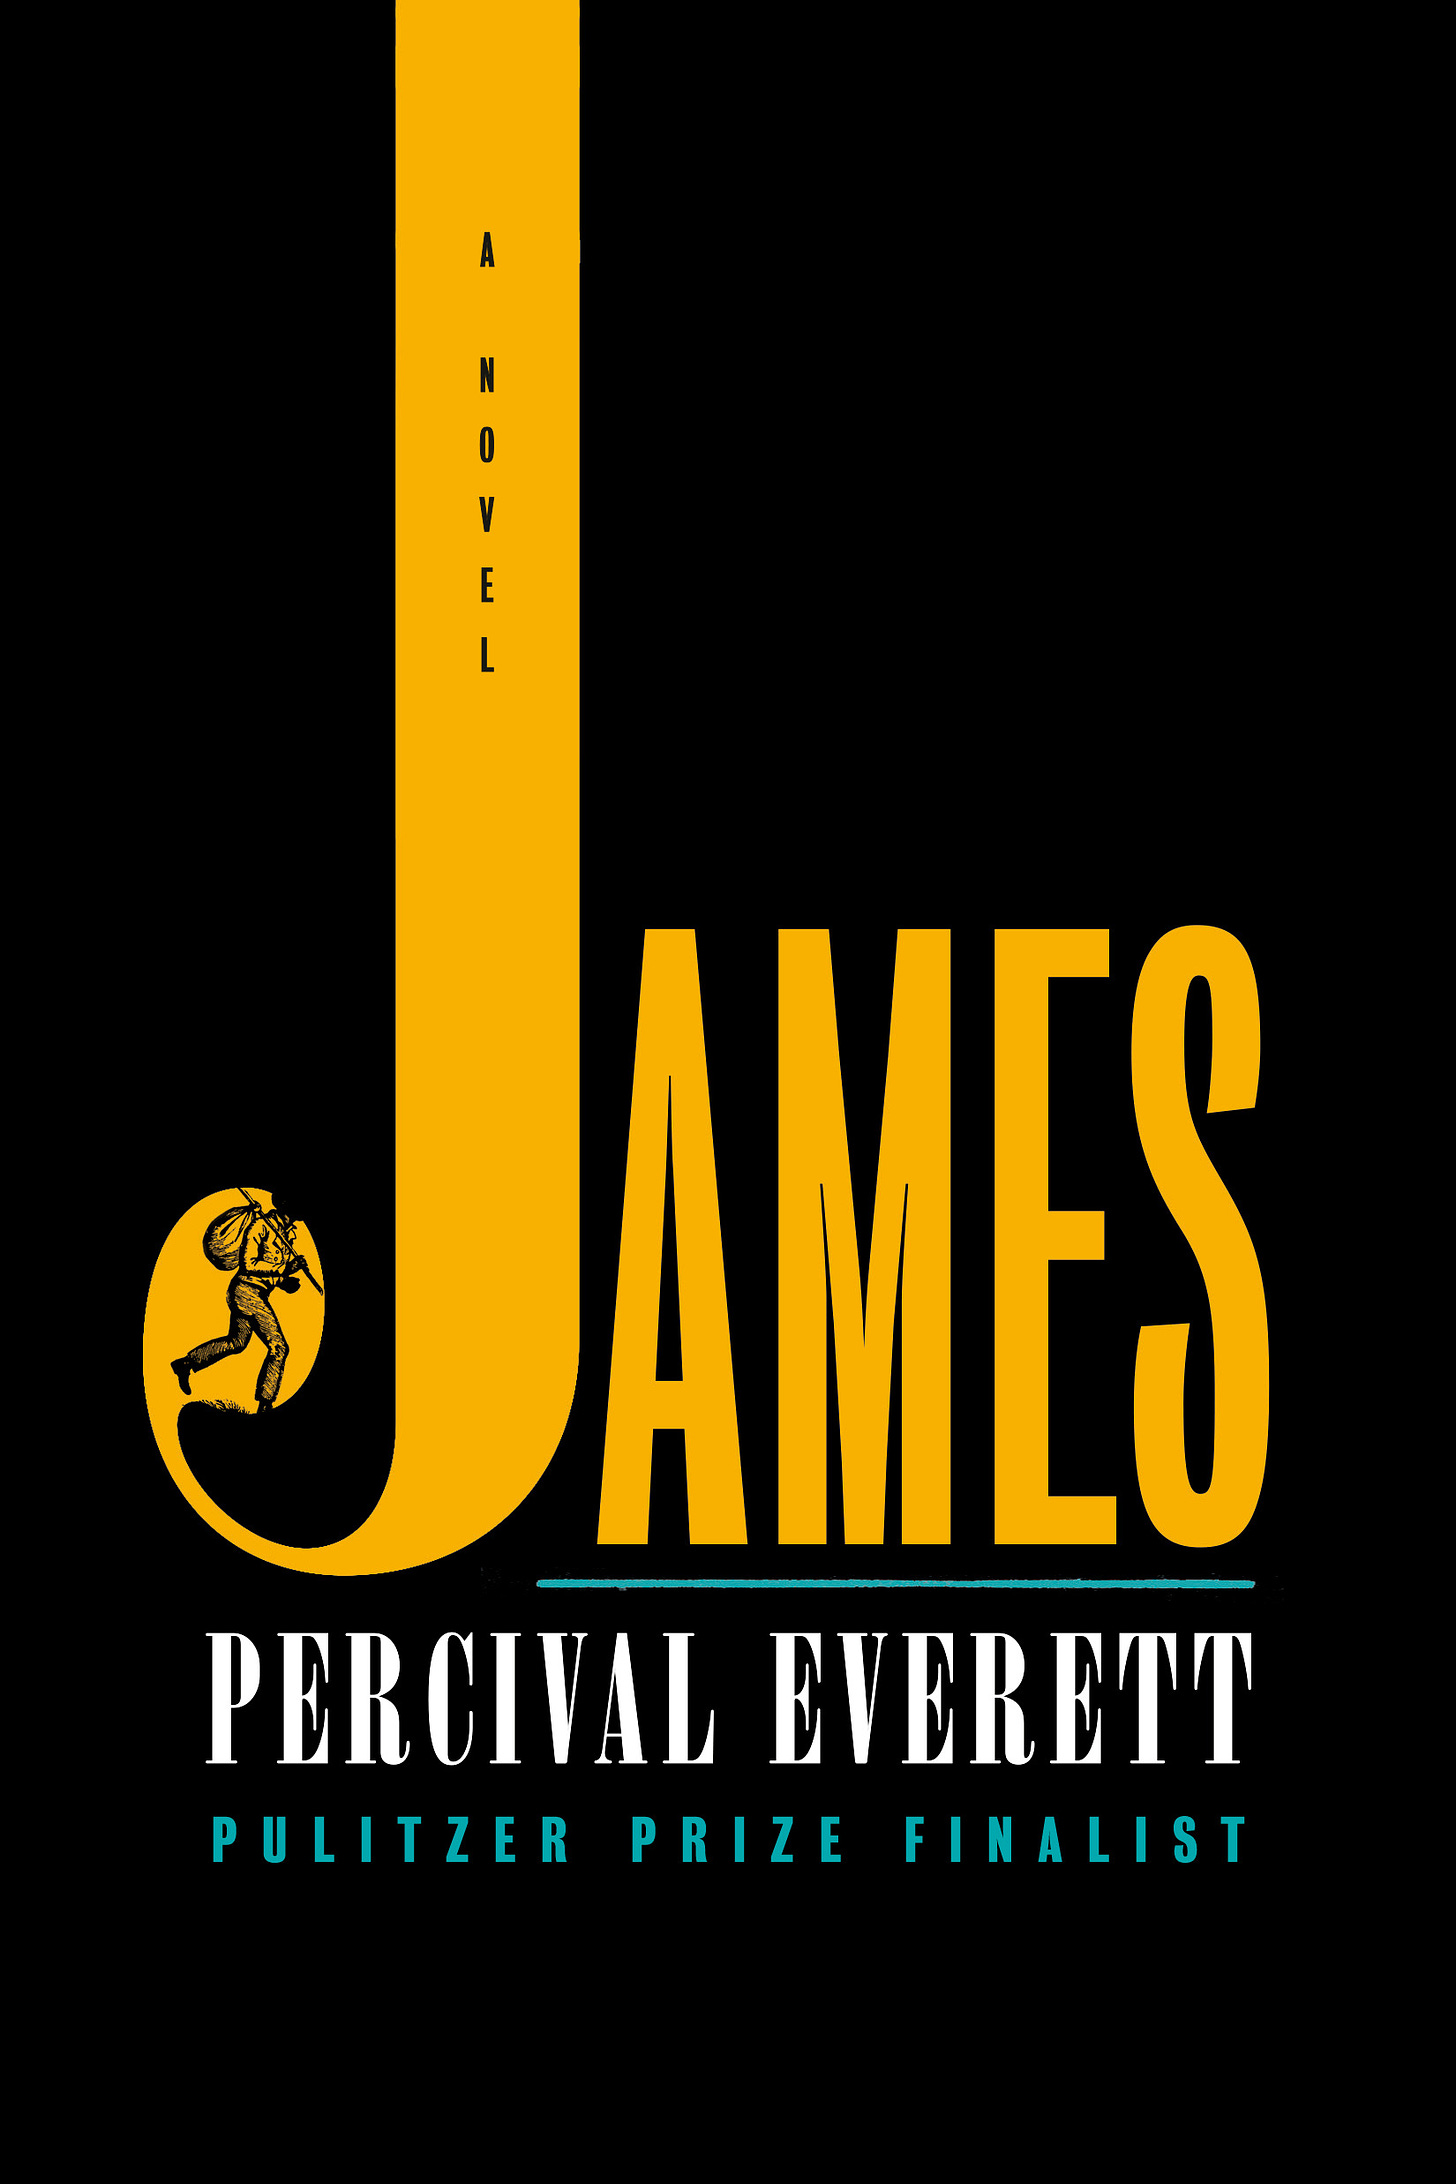 The cover of Percival Everett's new novel James, which is black with the word "James" written in an orange-y yellow color